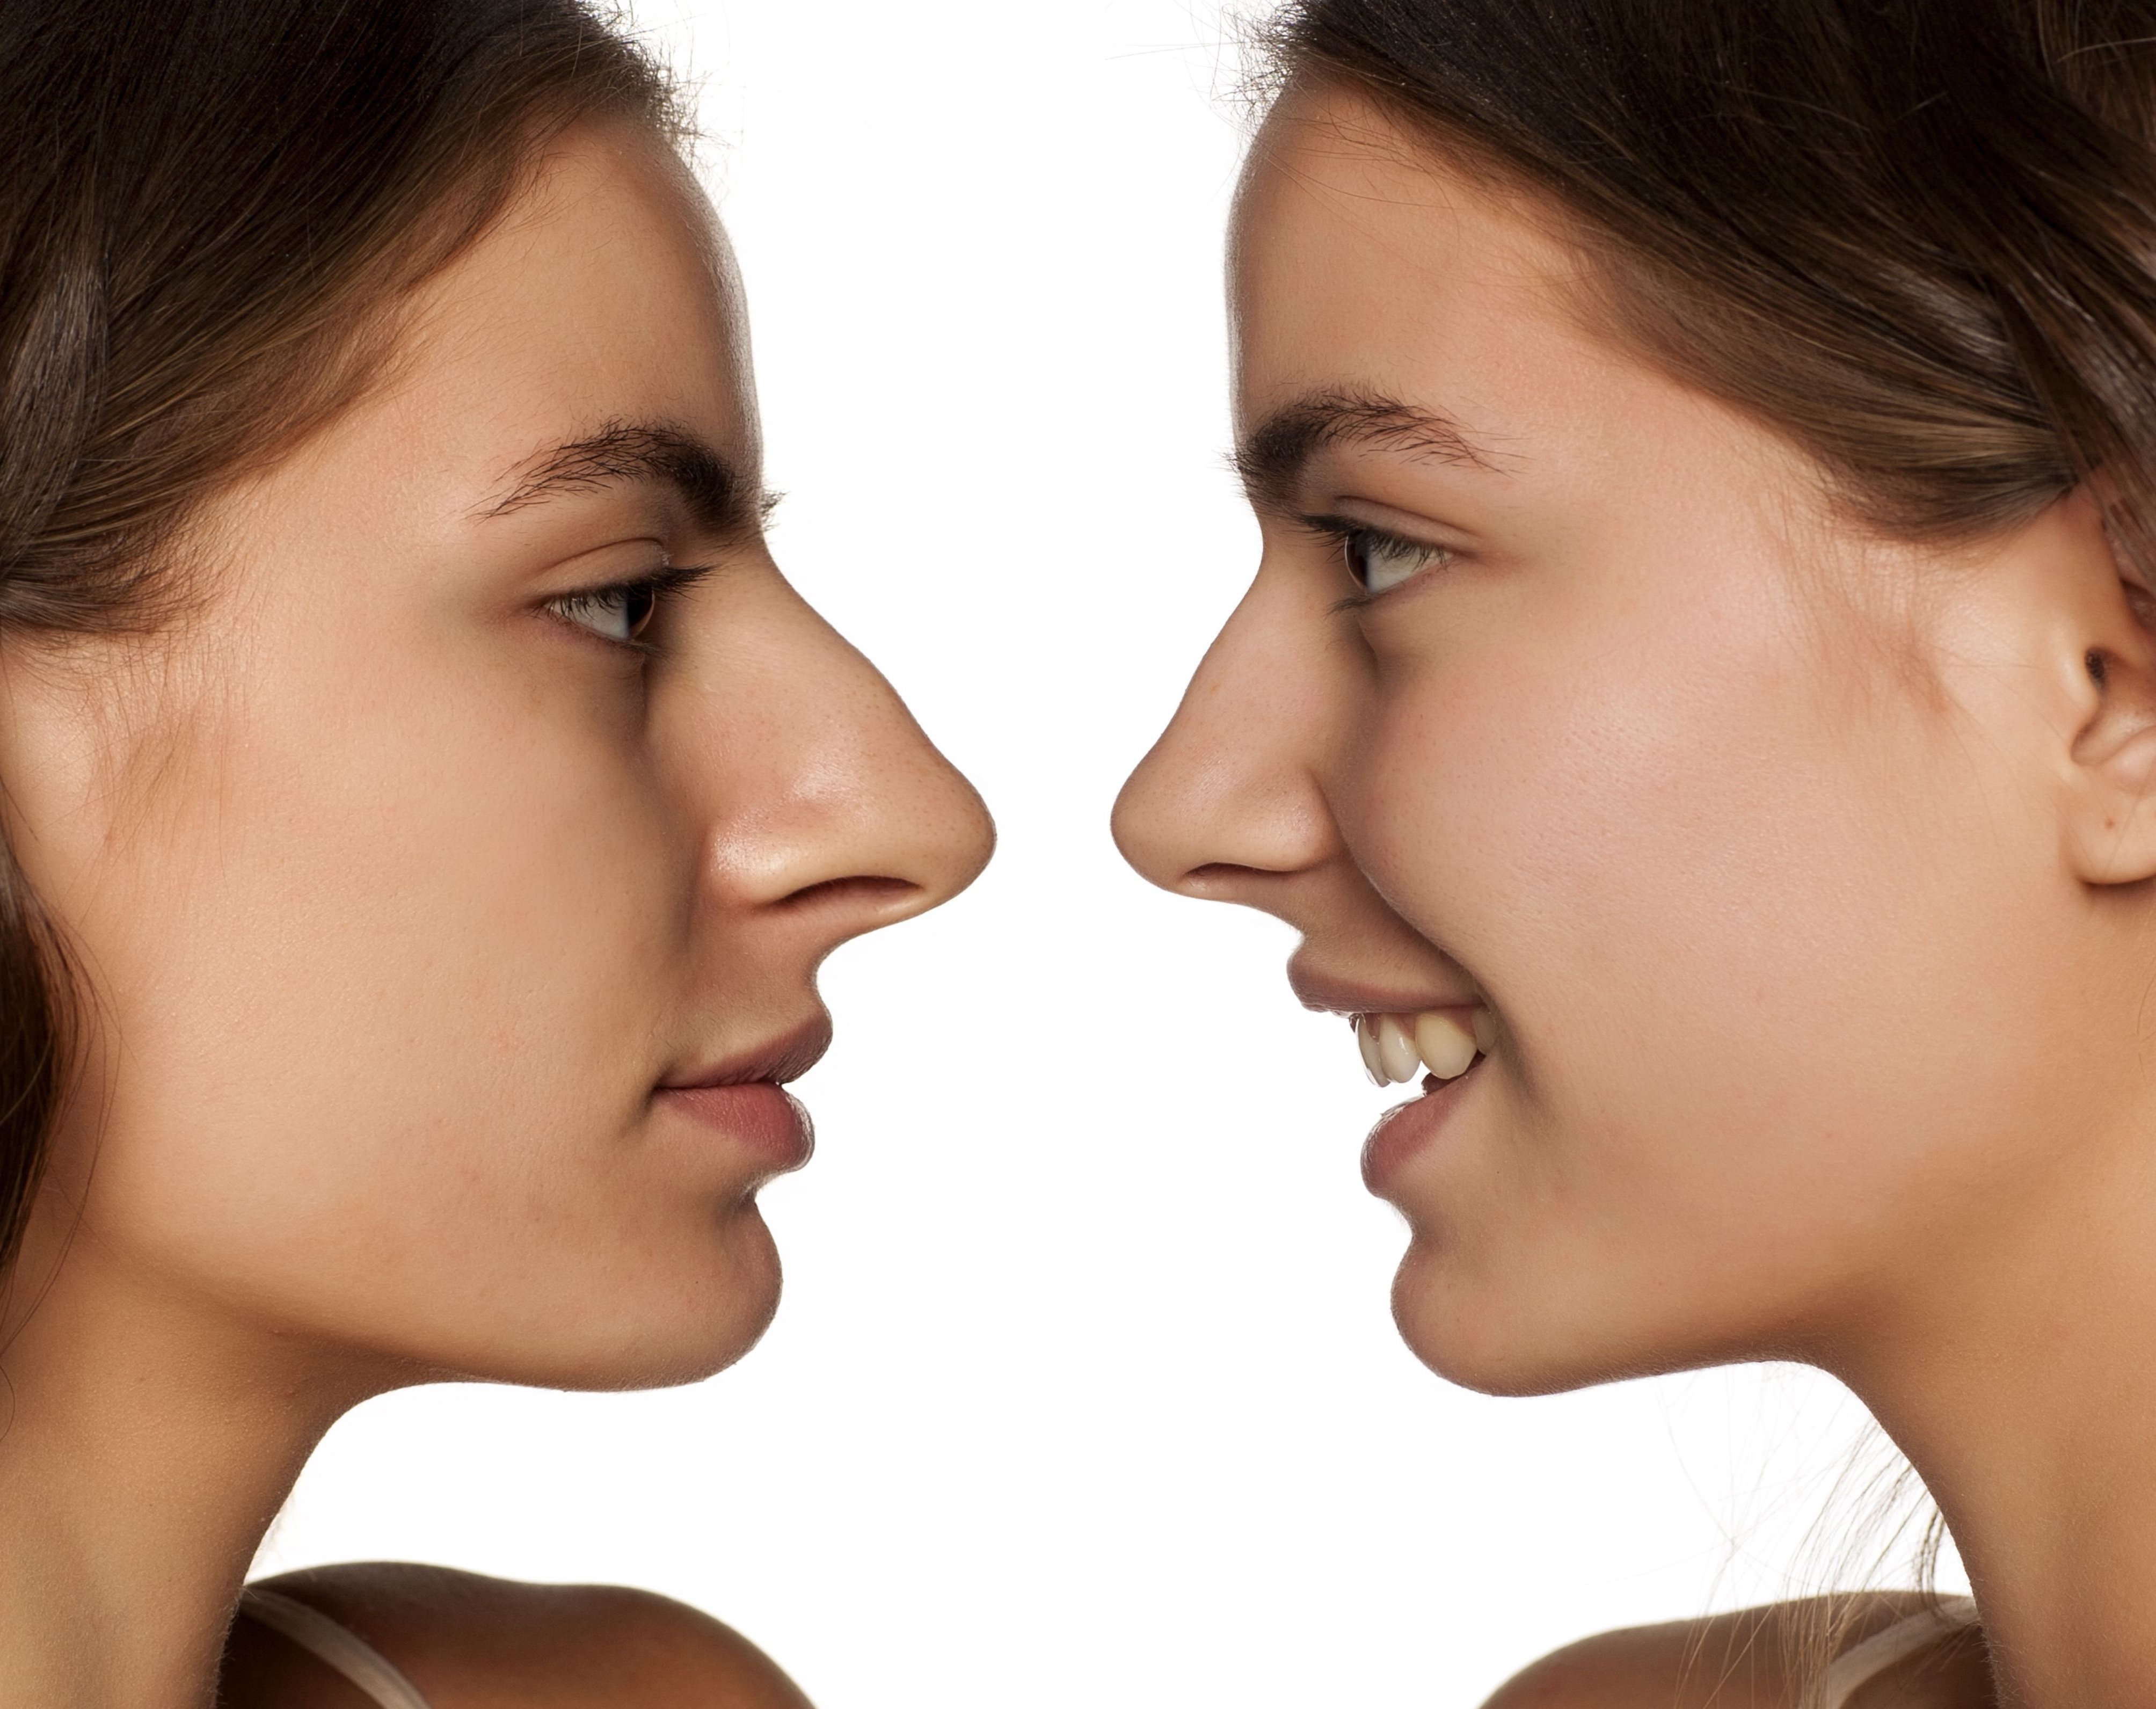 A Nose Job is Good for Your Health and Wellbeing and for Being Cool